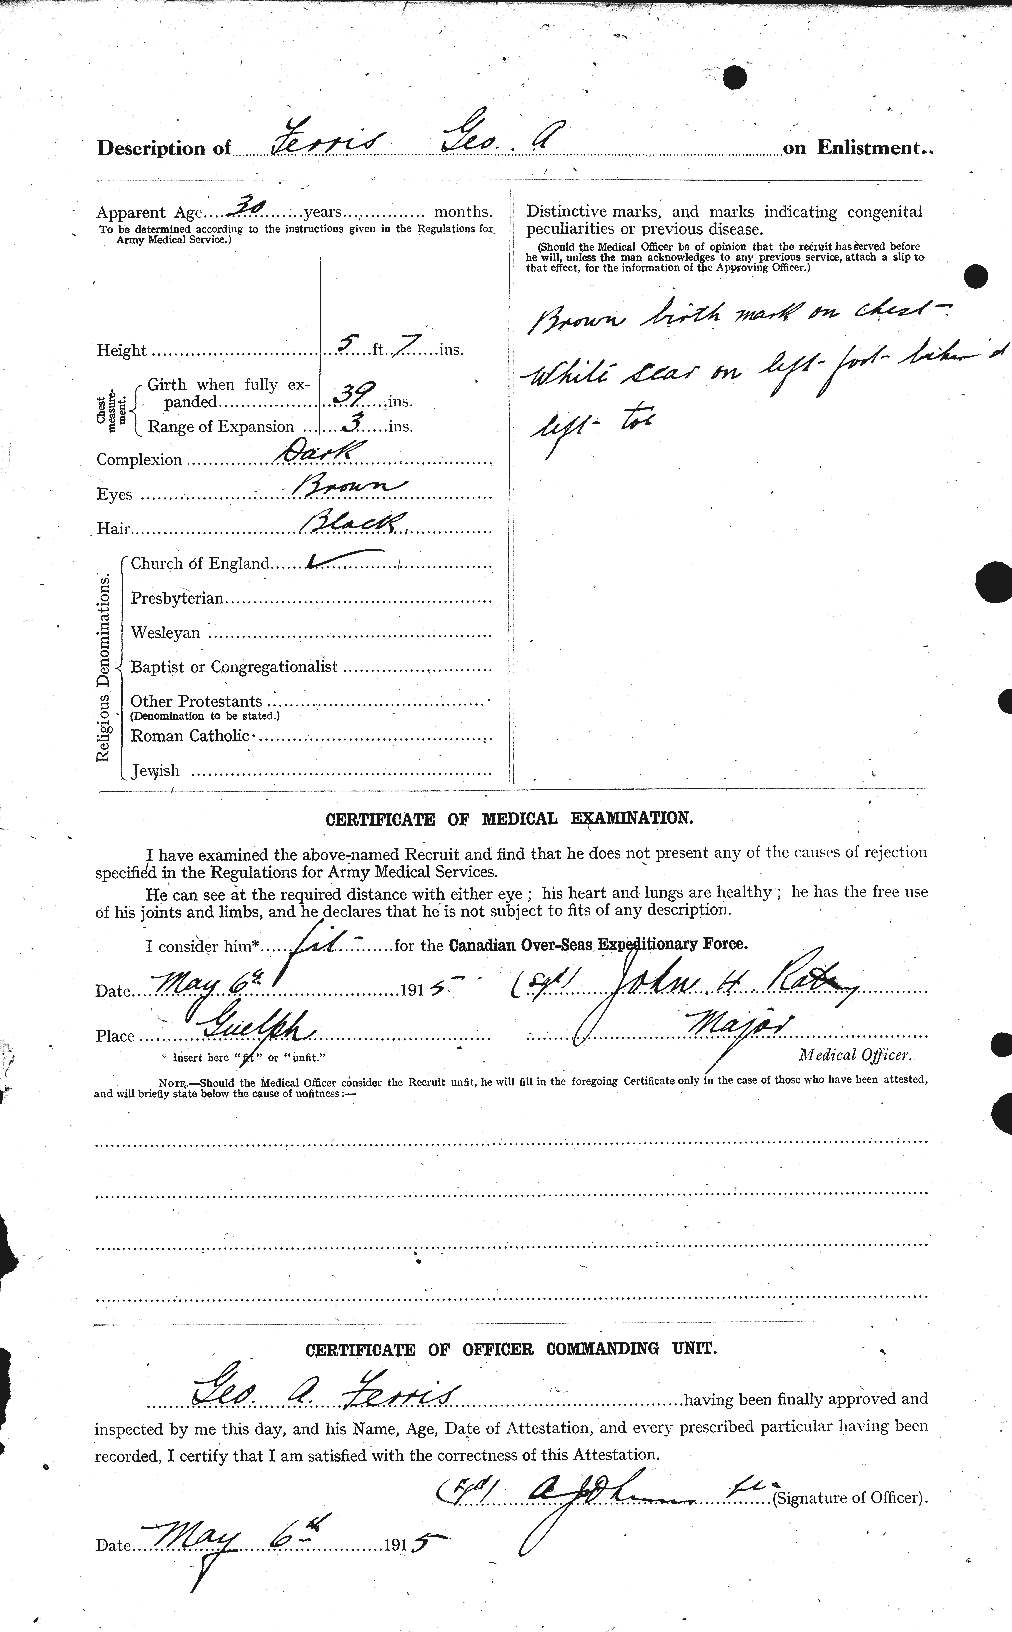 Personnel Records of the First World War - CEF 325182b